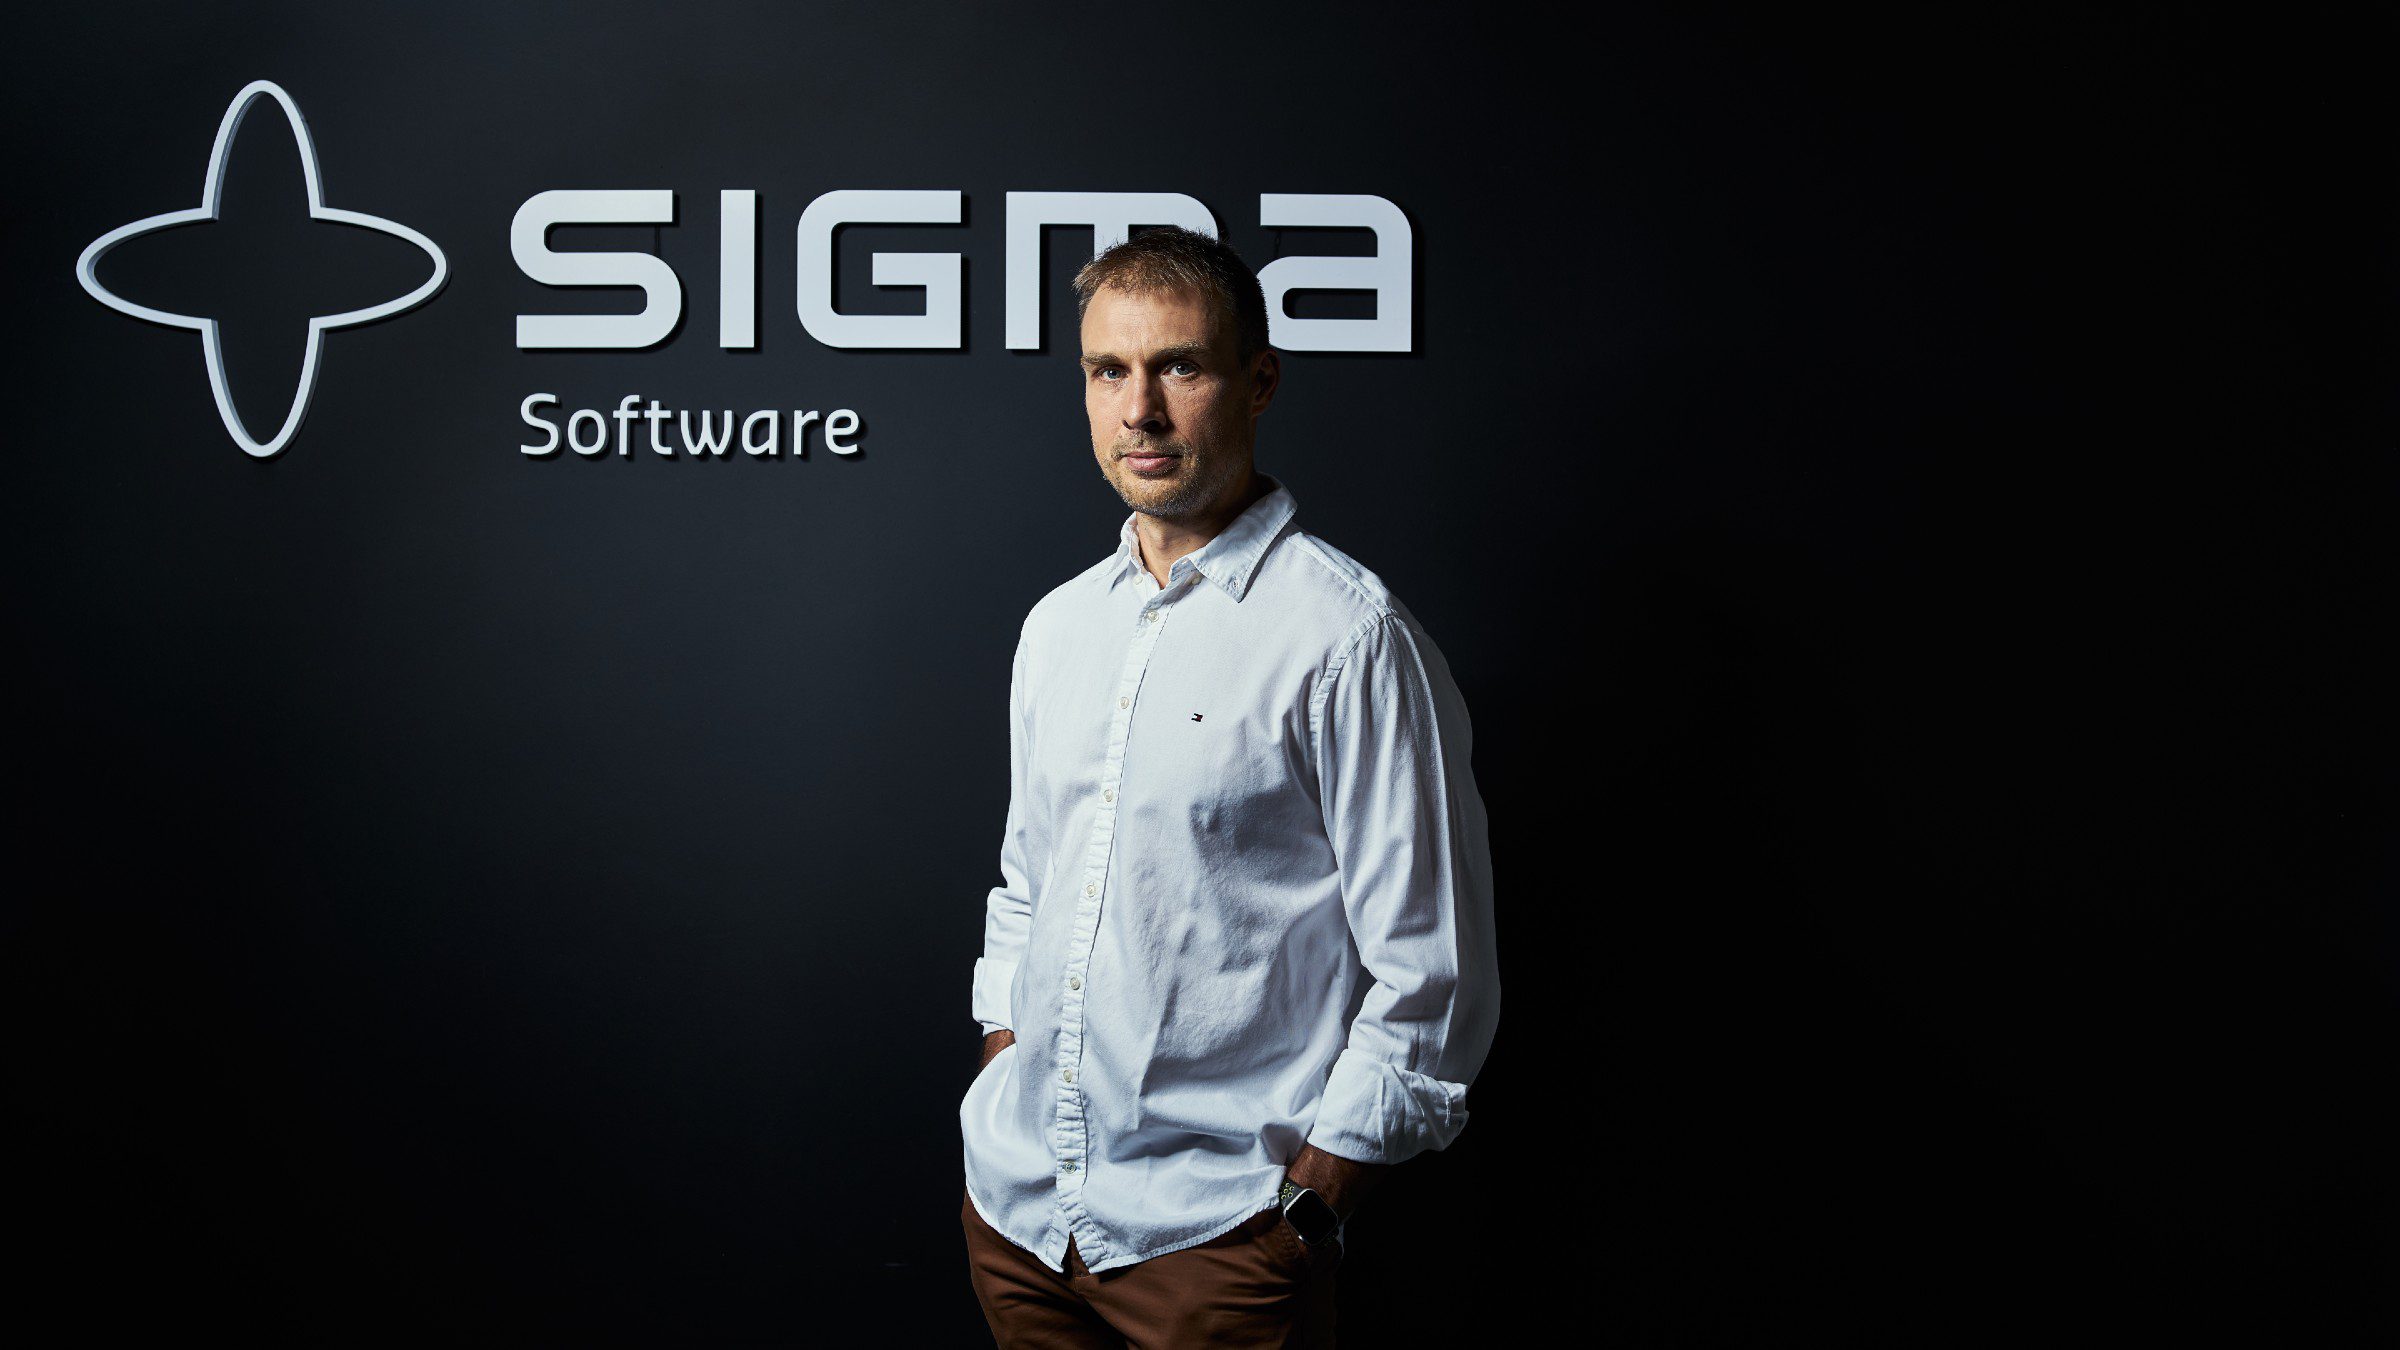 Valery Krasovsky. CEO and Co-founder of Sigma Software